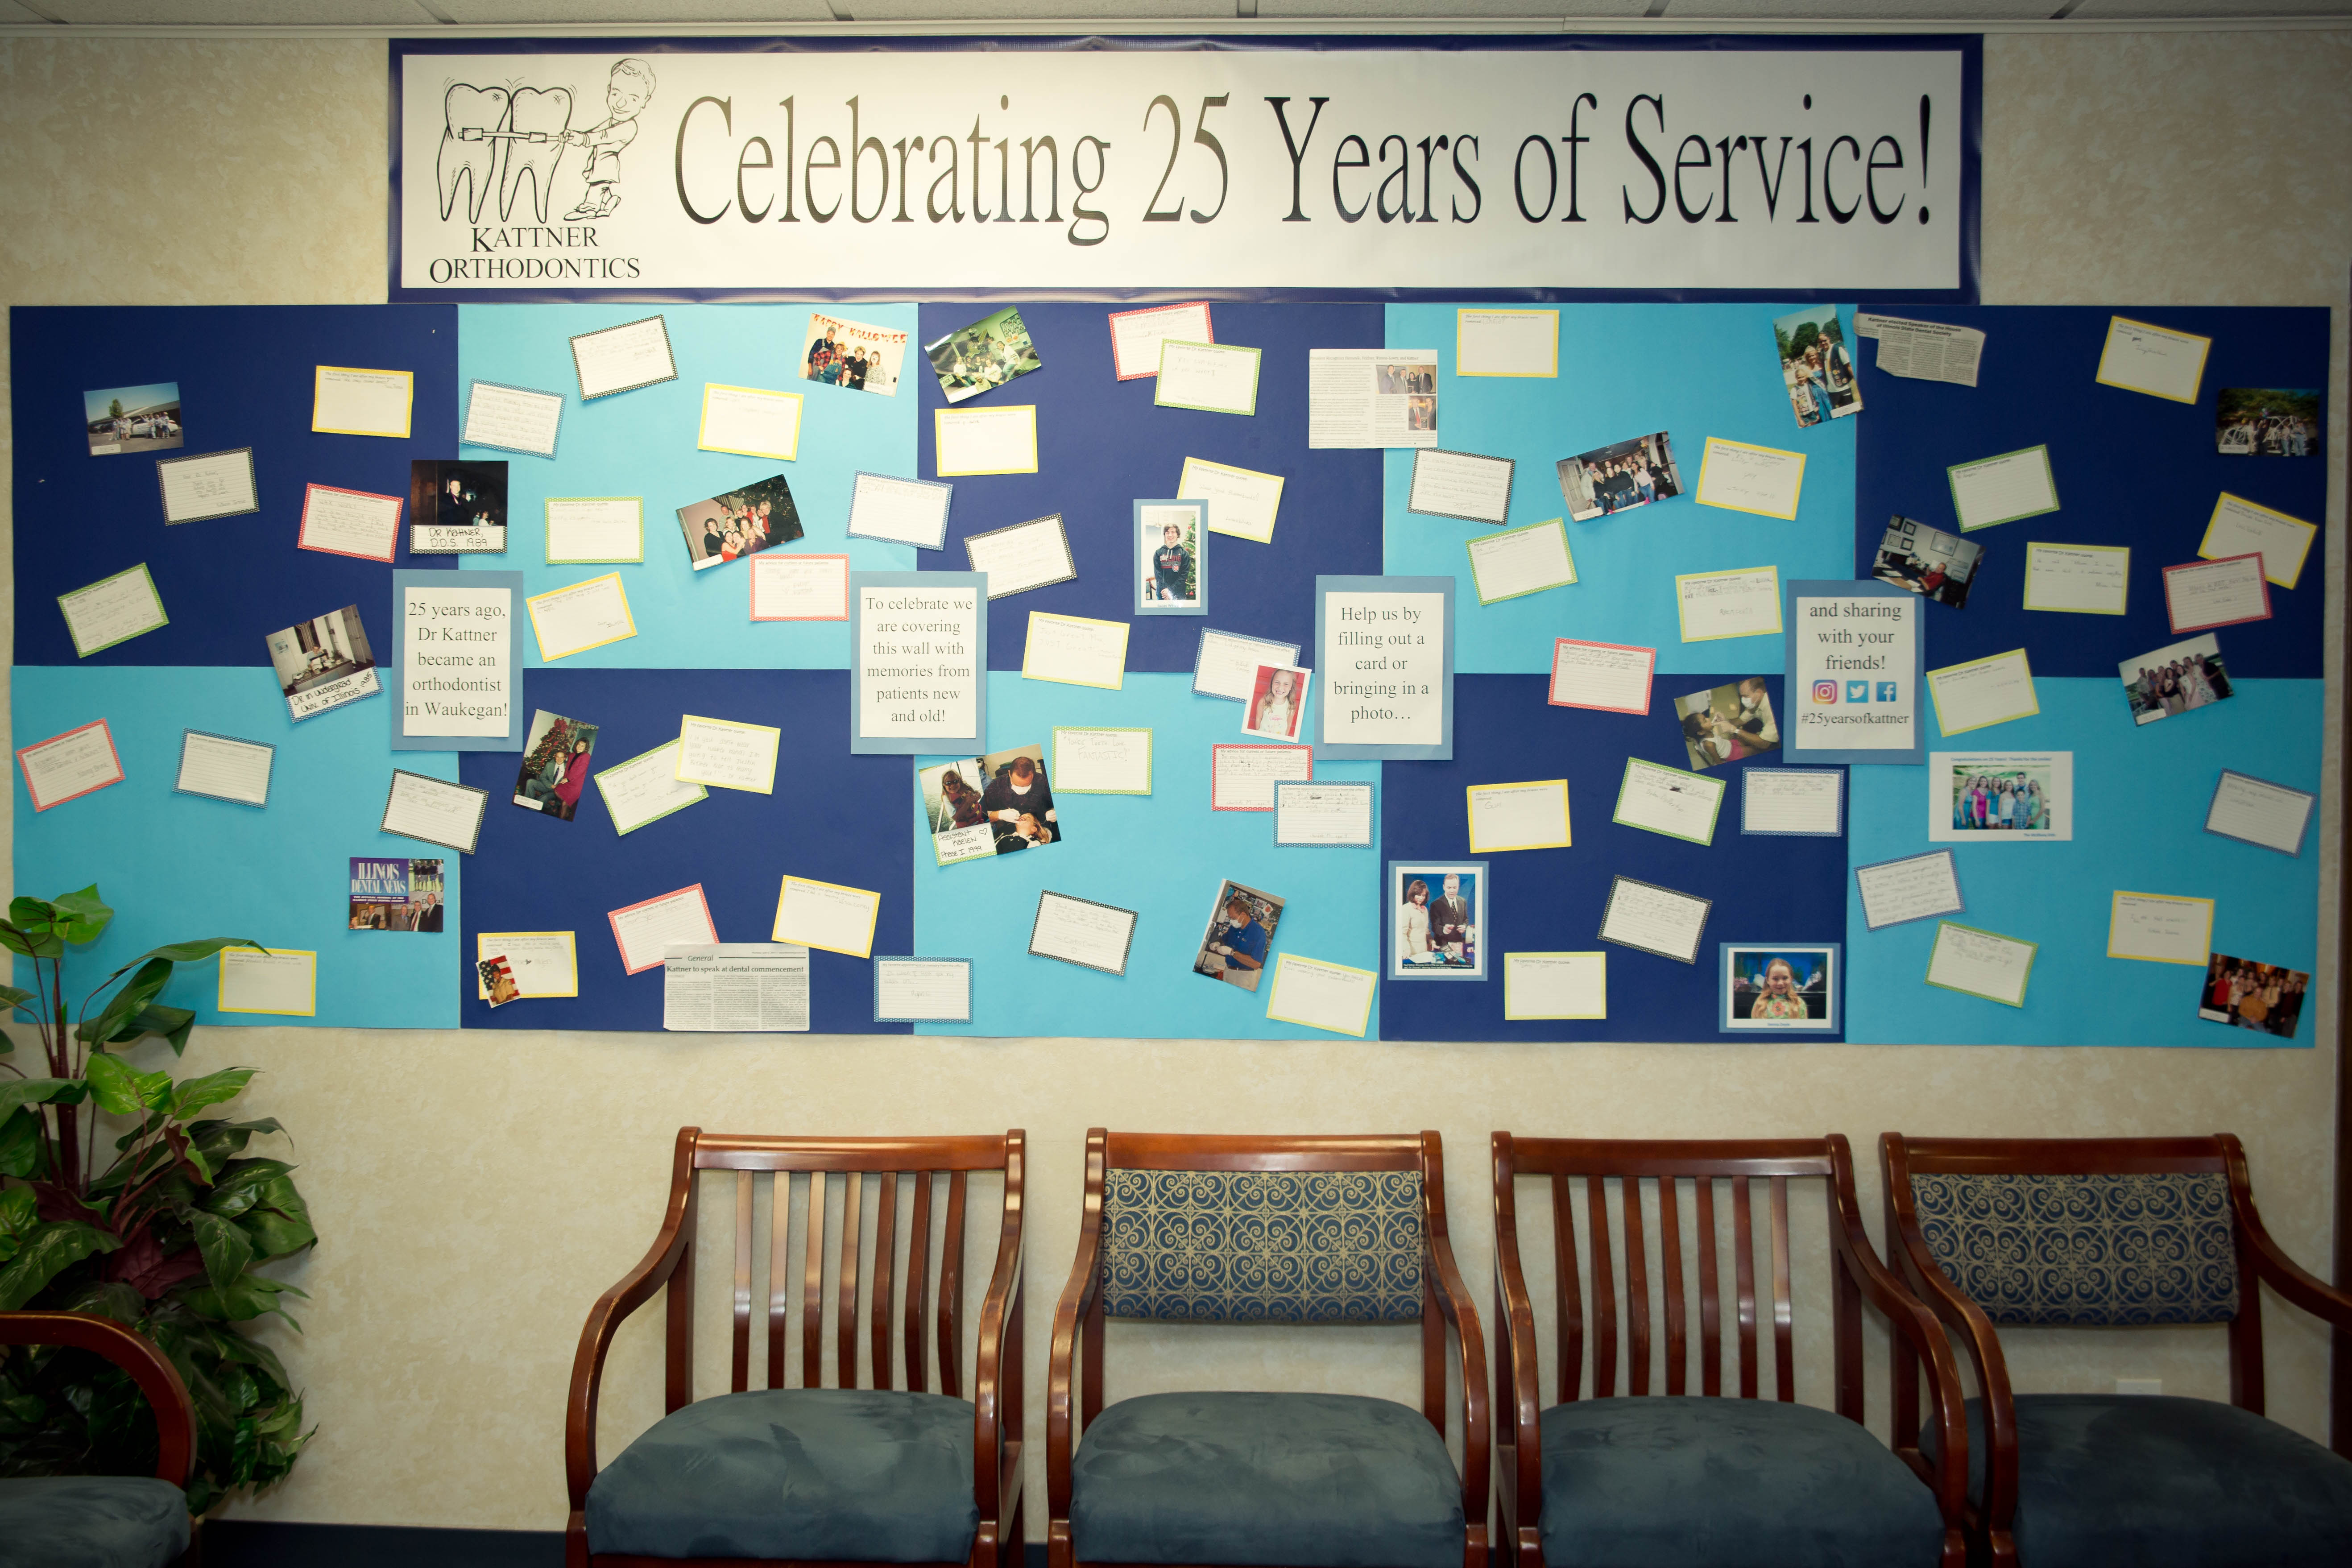 This is the image for the news article titled Kattner Orthodontics Celebrates 25 Years As Waukegan’s Top Orthodontist